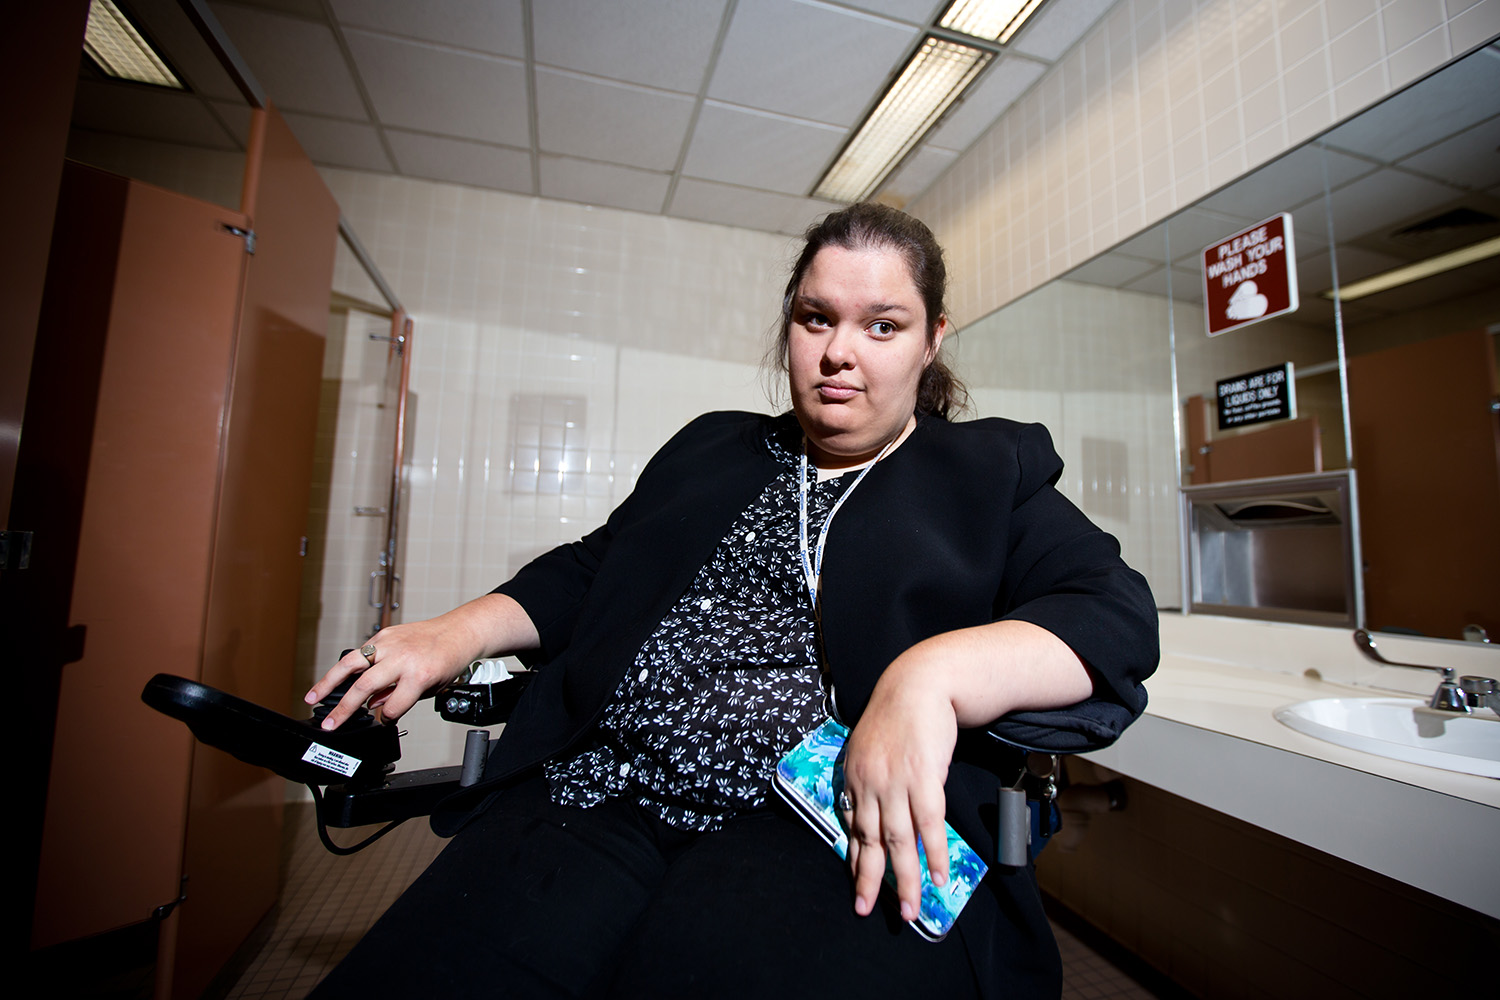 Amy Litzinger poses outside of a bathroom stall that's too small for her and her attendant. Litzinger, along with many other disabled Texans, is concerned about the implications a 